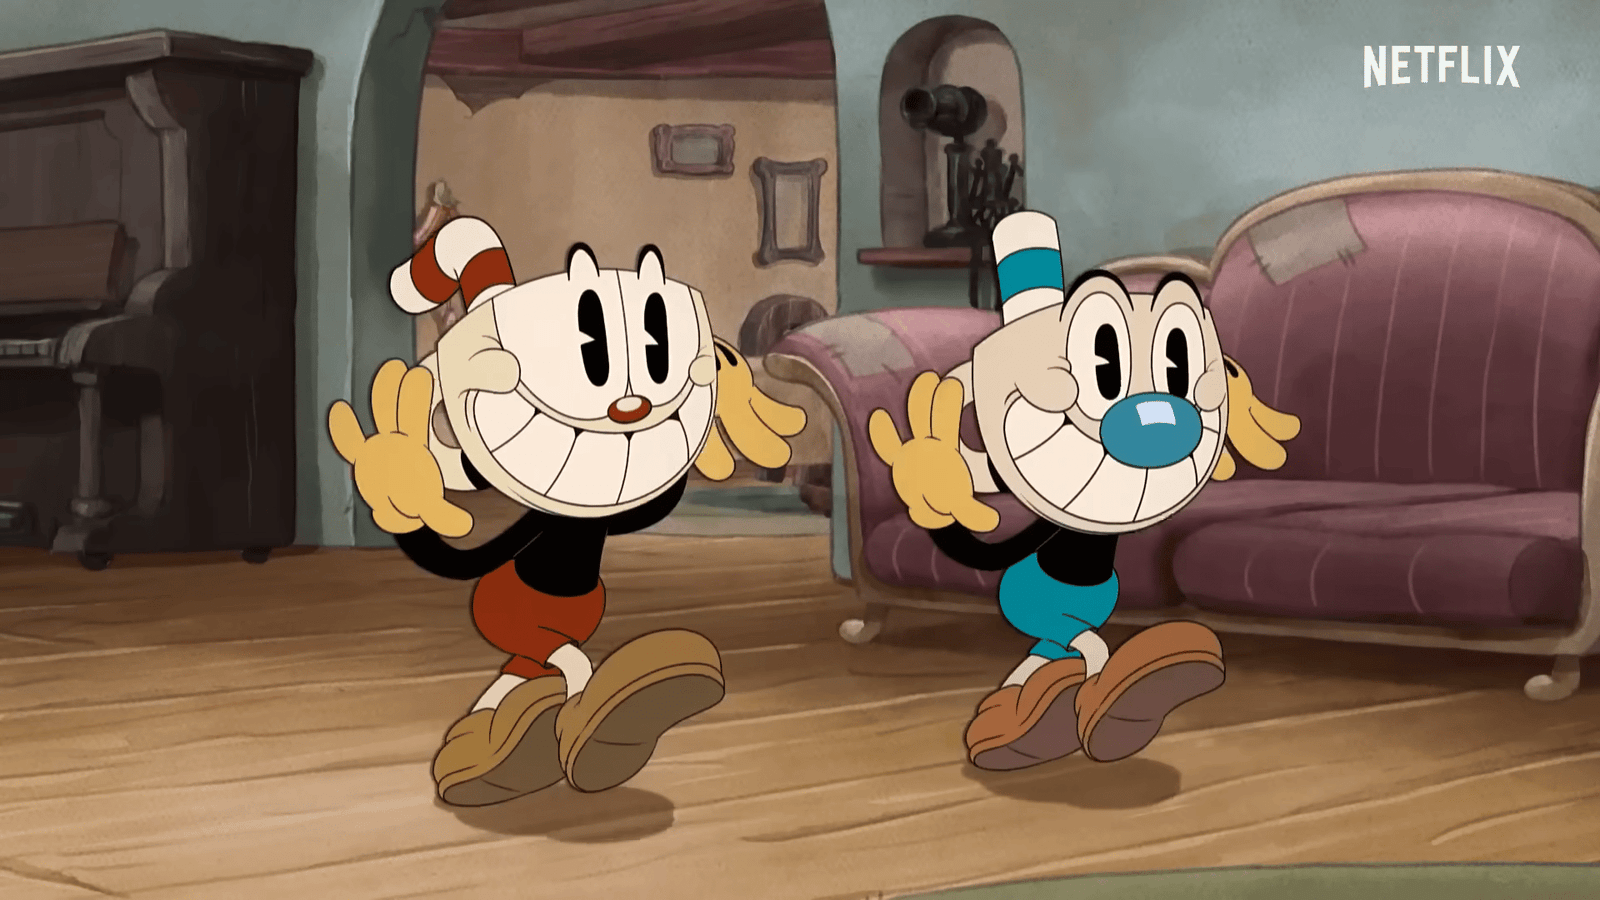 Is The Cuphead Show kid friendly?